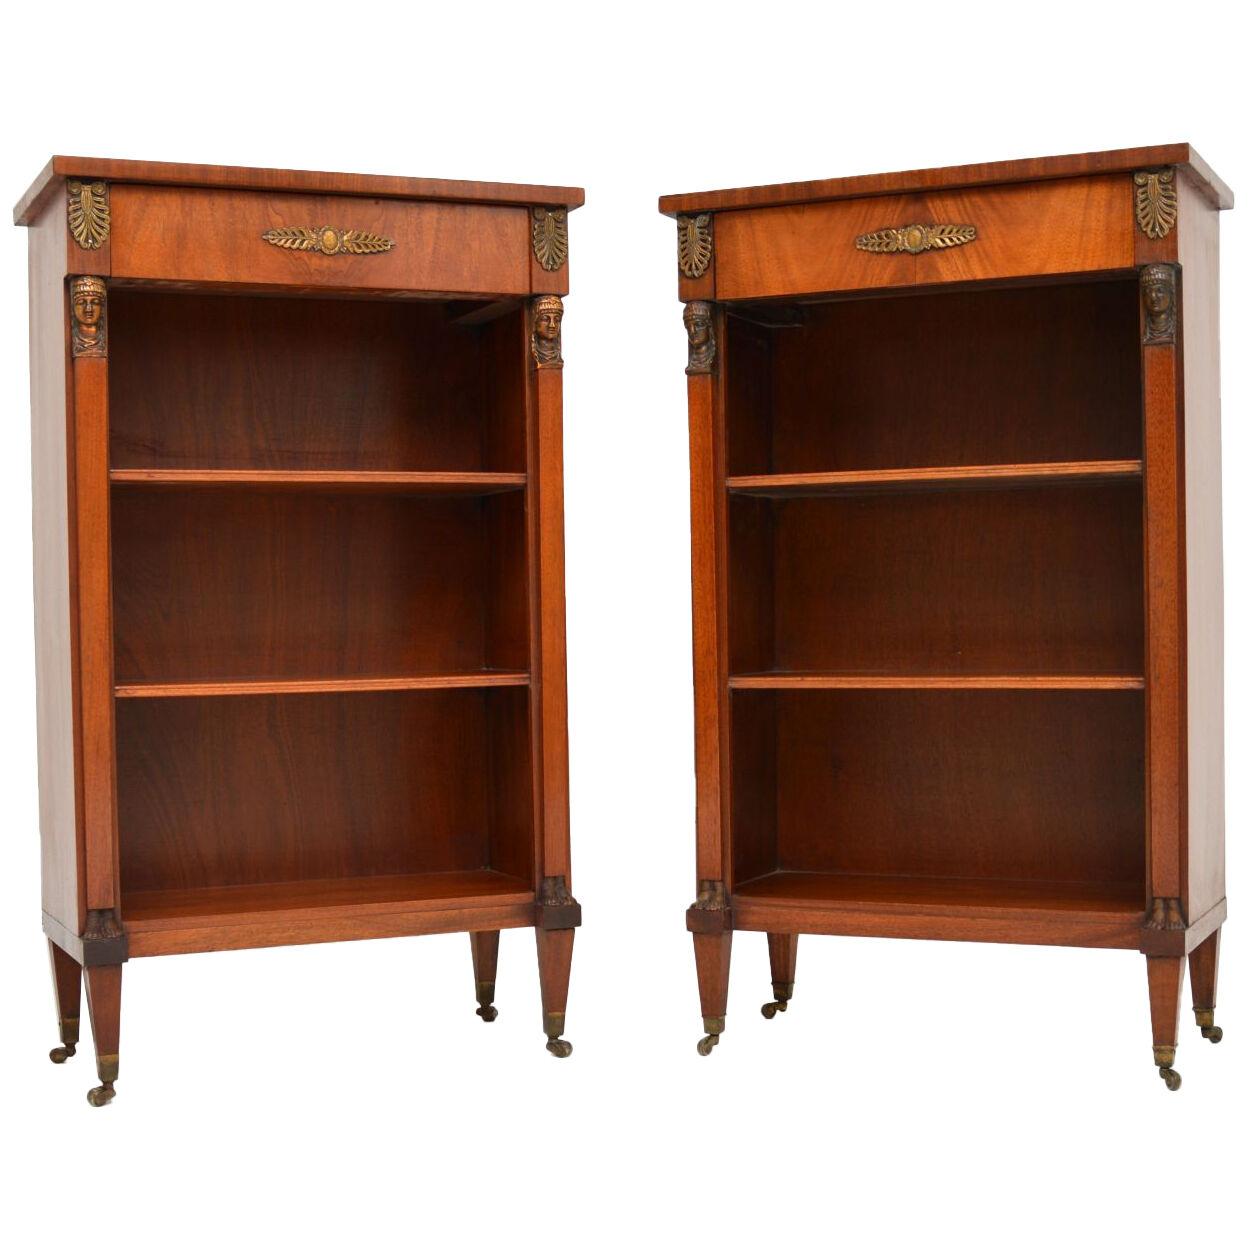 Pair of Antique Mahogany Open Bookcases